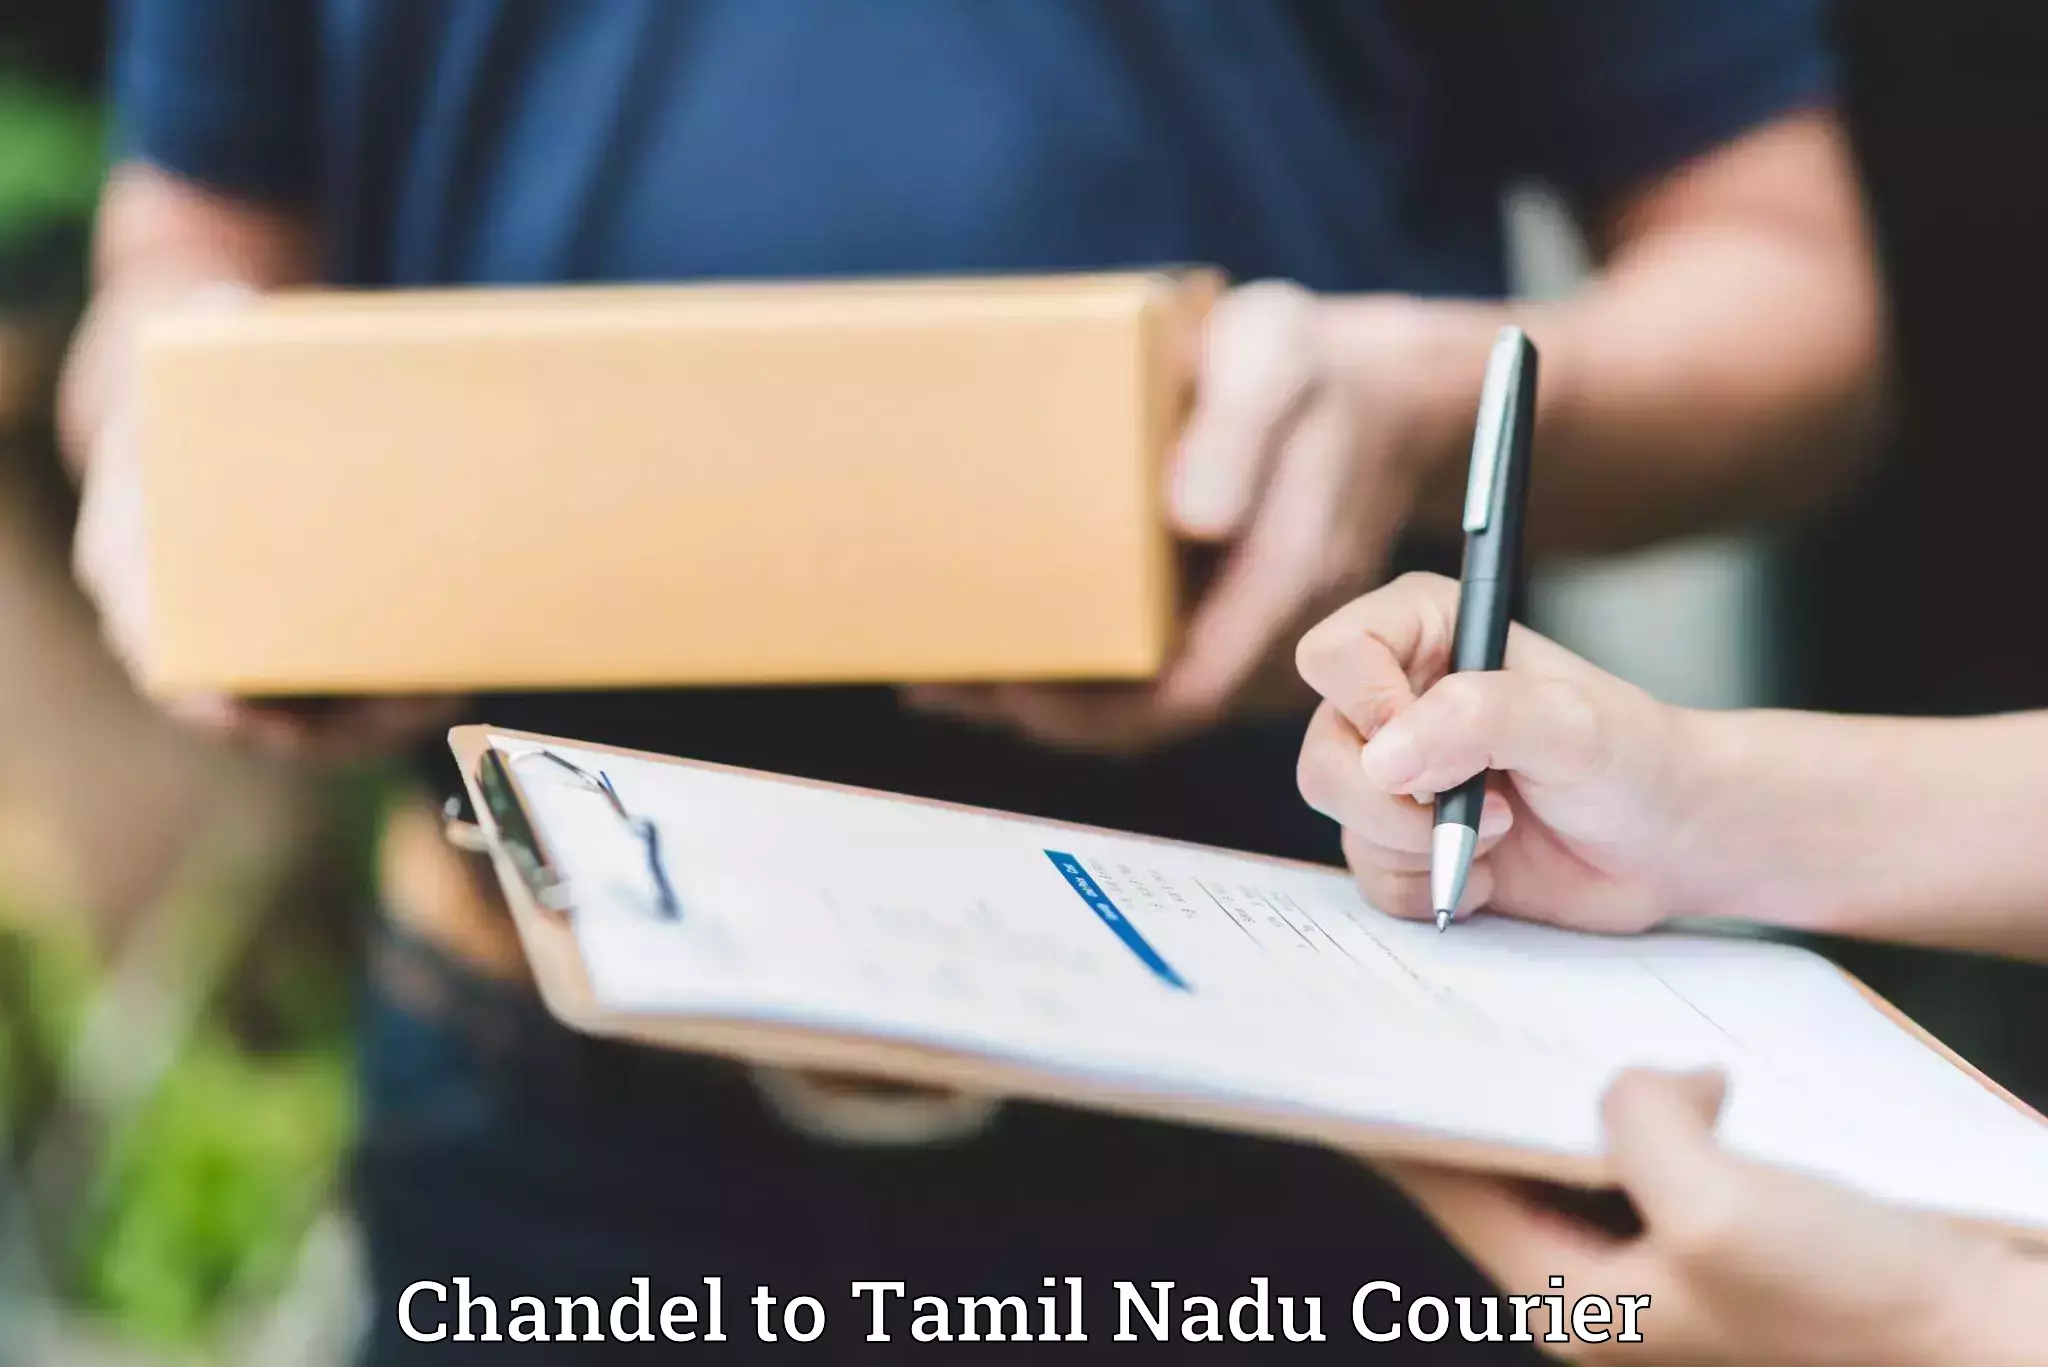 Personal effects shipping Chandel to Chennai Port